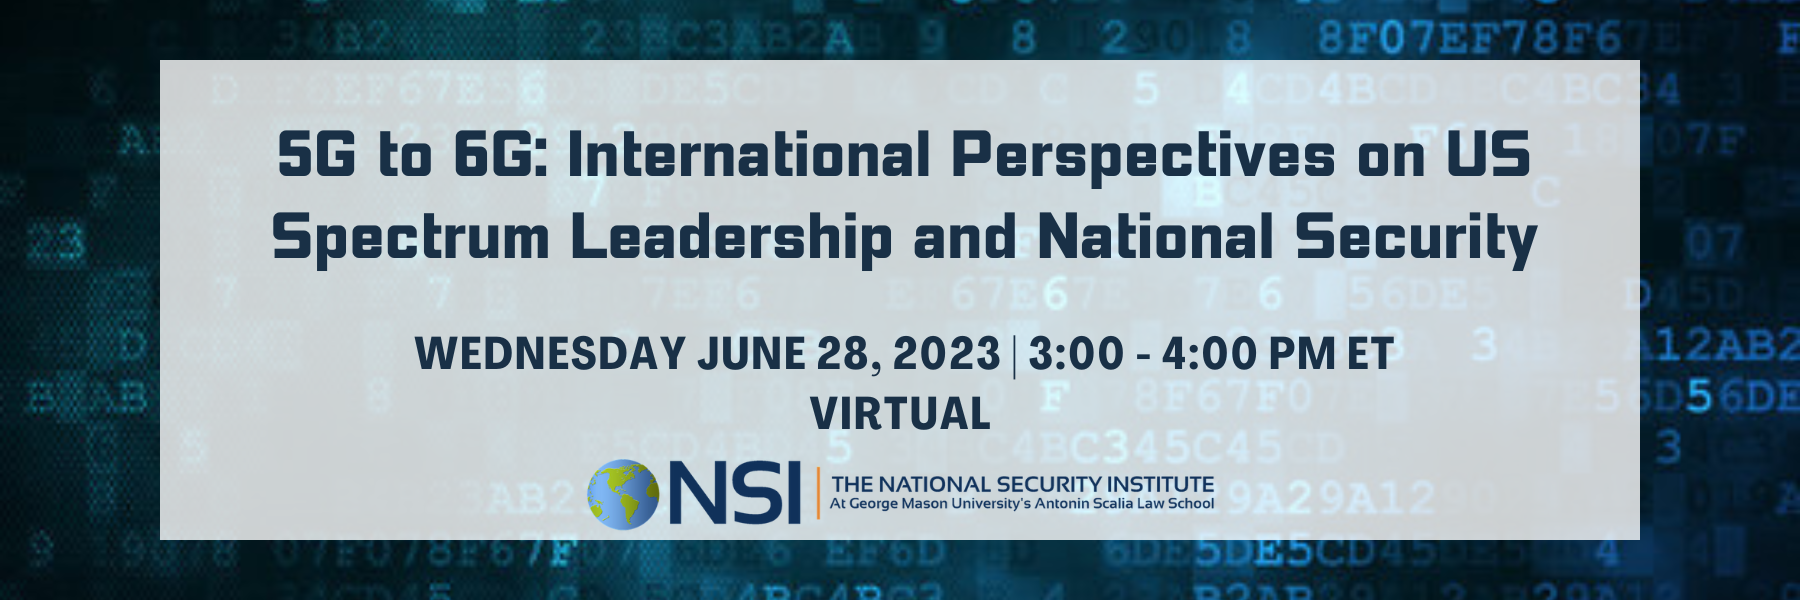 5G to 6G: International Perspectives on US Spectrum Leadership and National Security